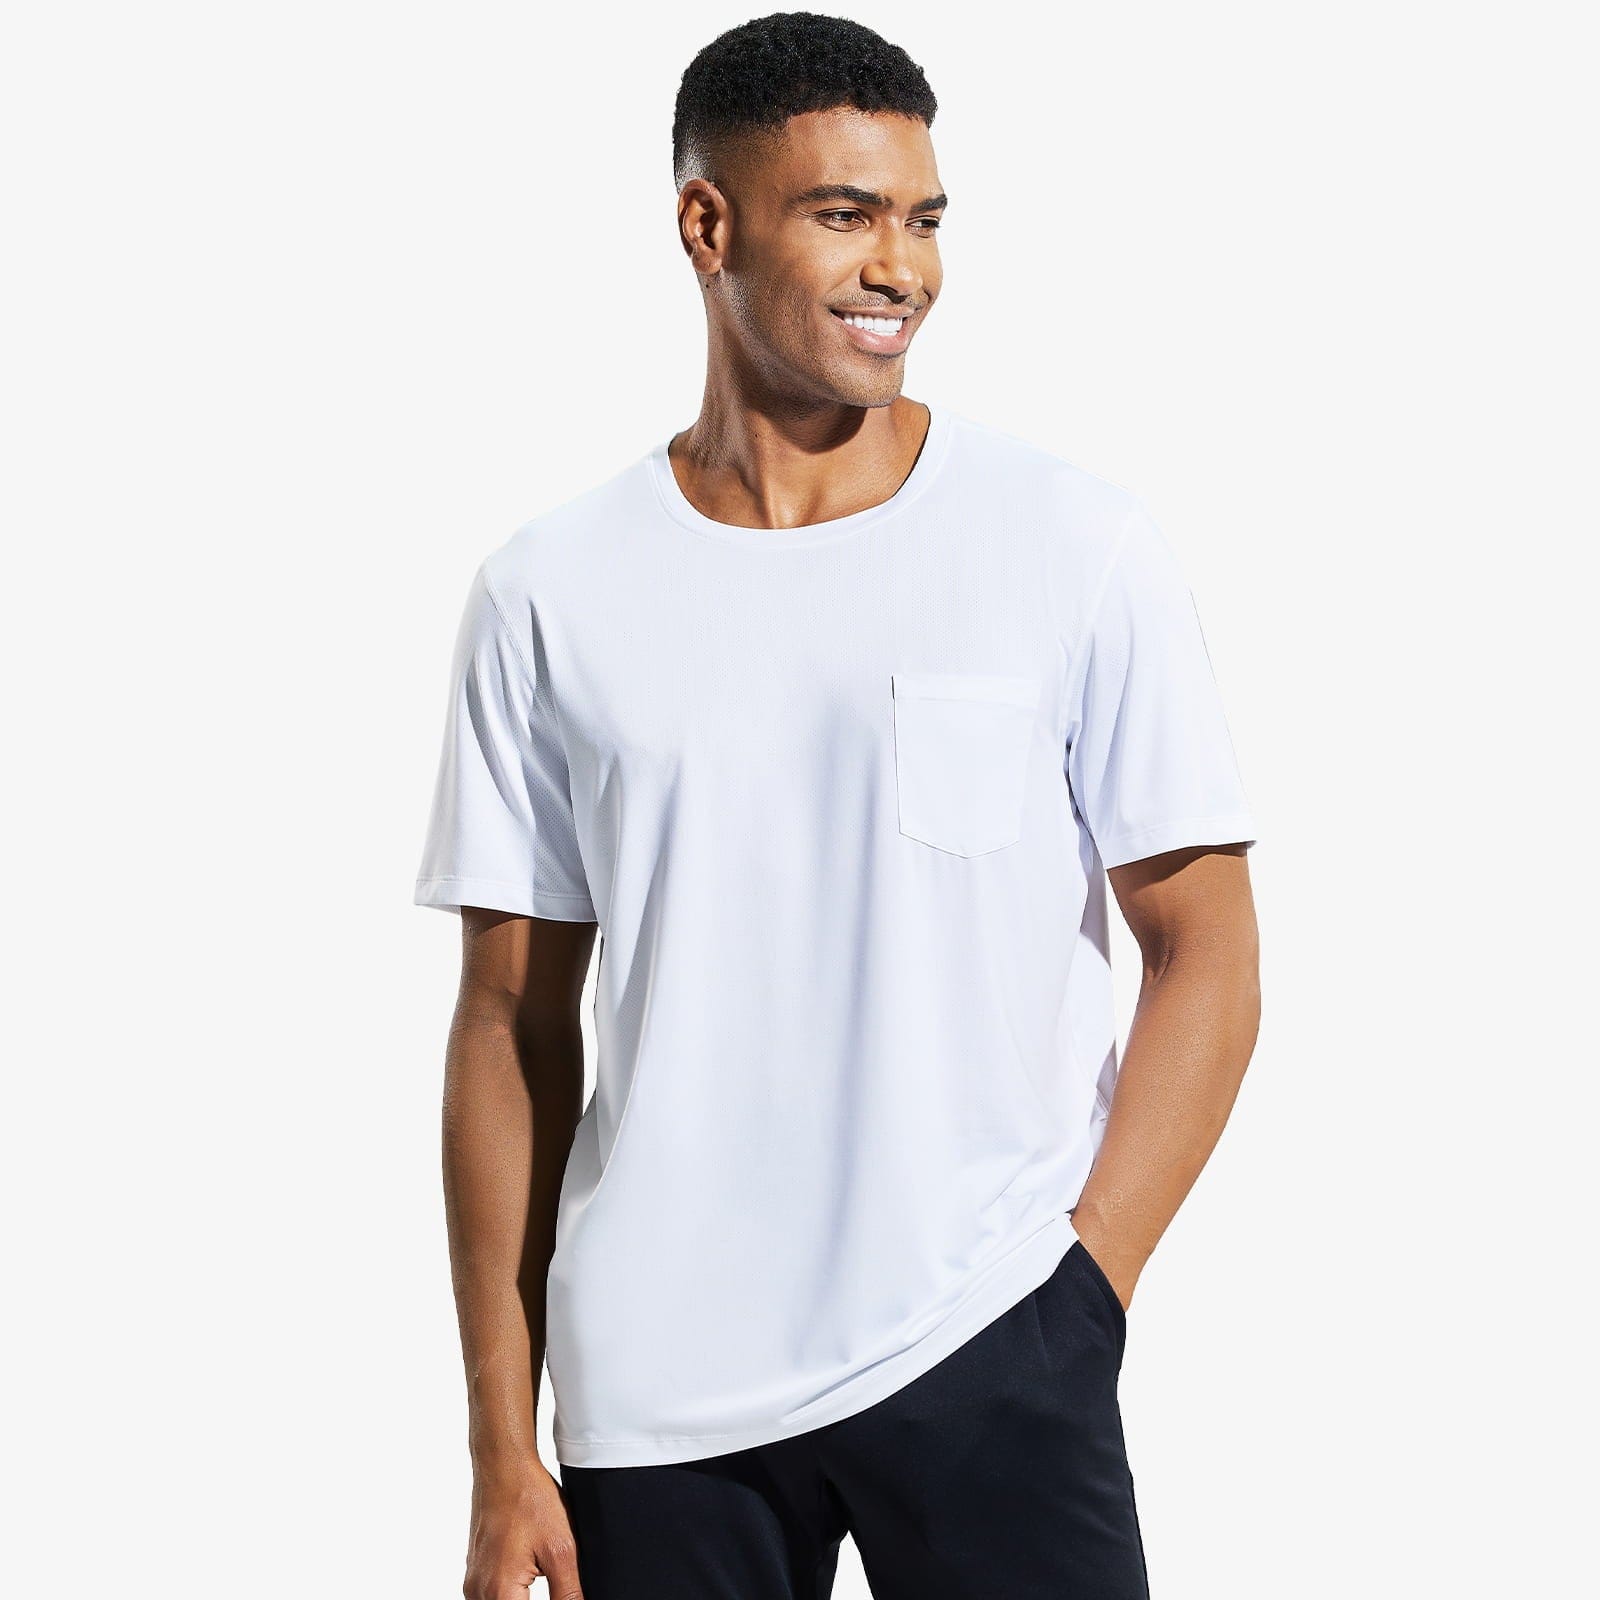 Men's Dry Fit Athletic T-Shirt with Pocket Men Shirts White / S MIER